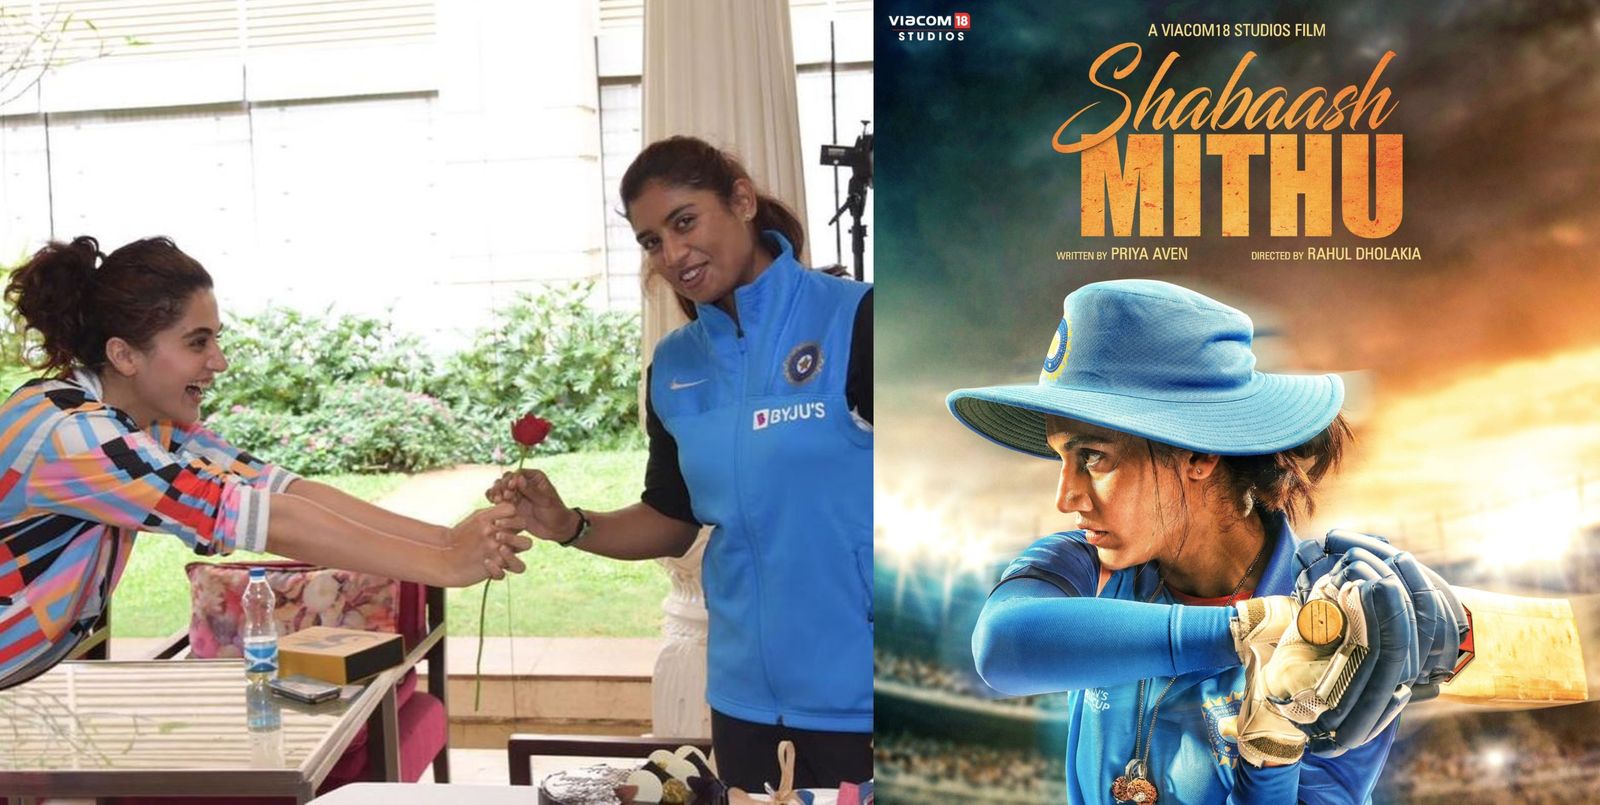 Shabaash Mithu: Taapsee Pannu To Begin Training With Mithali Raj Before Film Goes On Floors In April